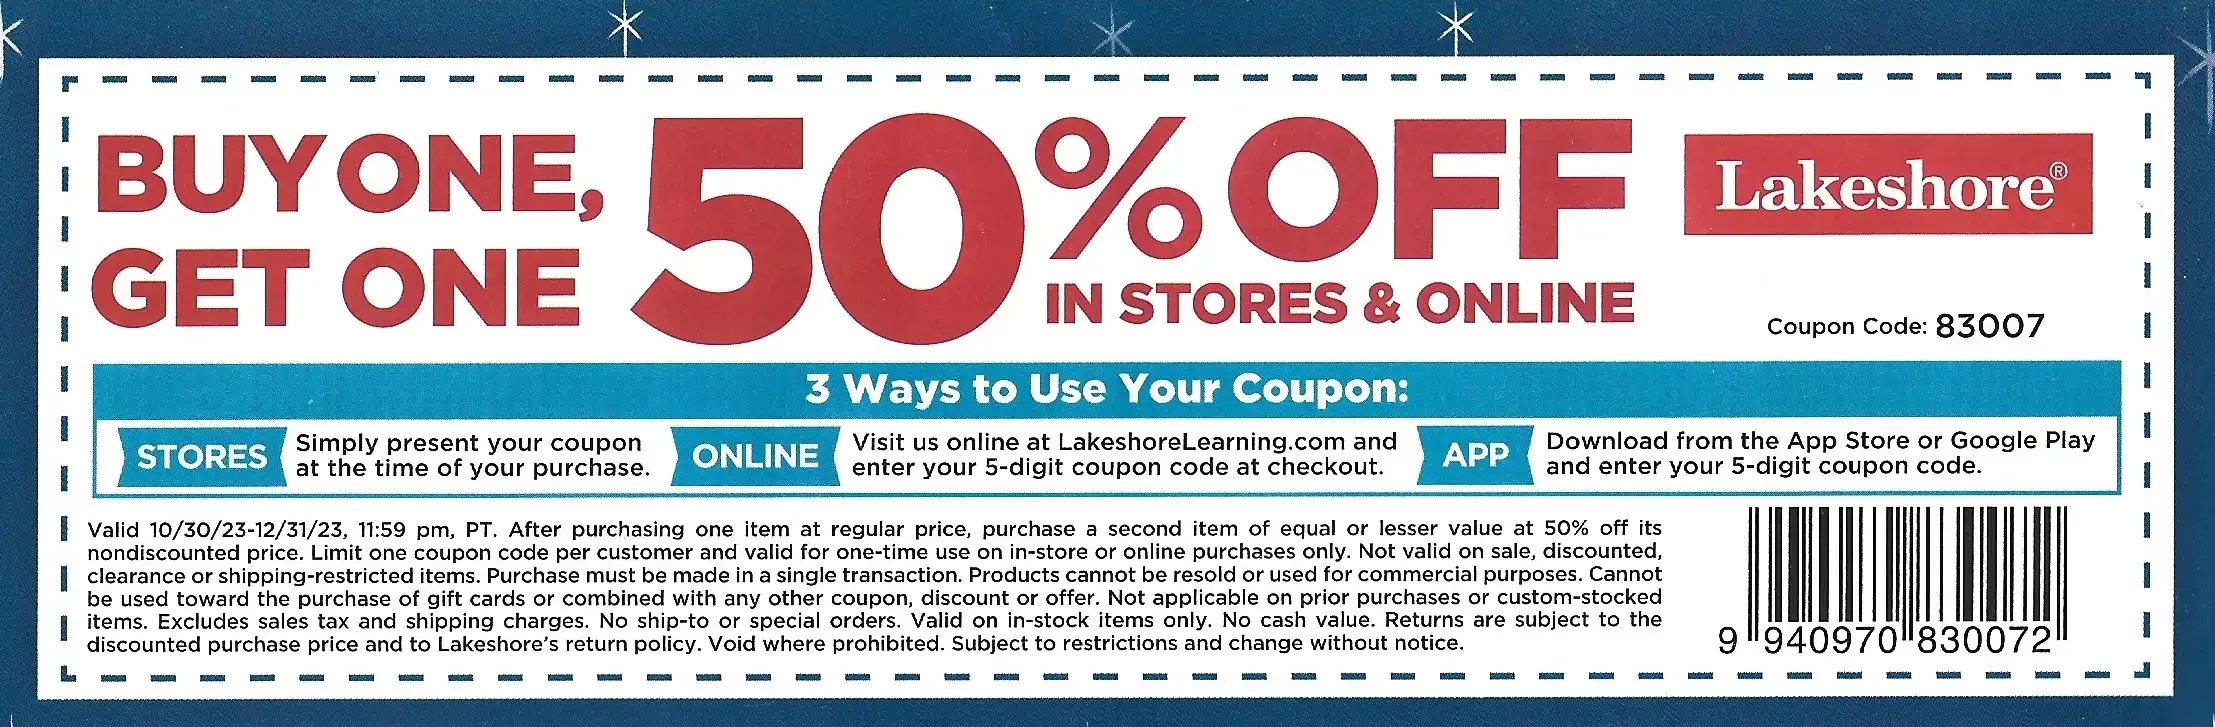 LakeShore Learning: Buy One Get One 50% Off In Stores & Online Coupon - Expires 12/31/2023